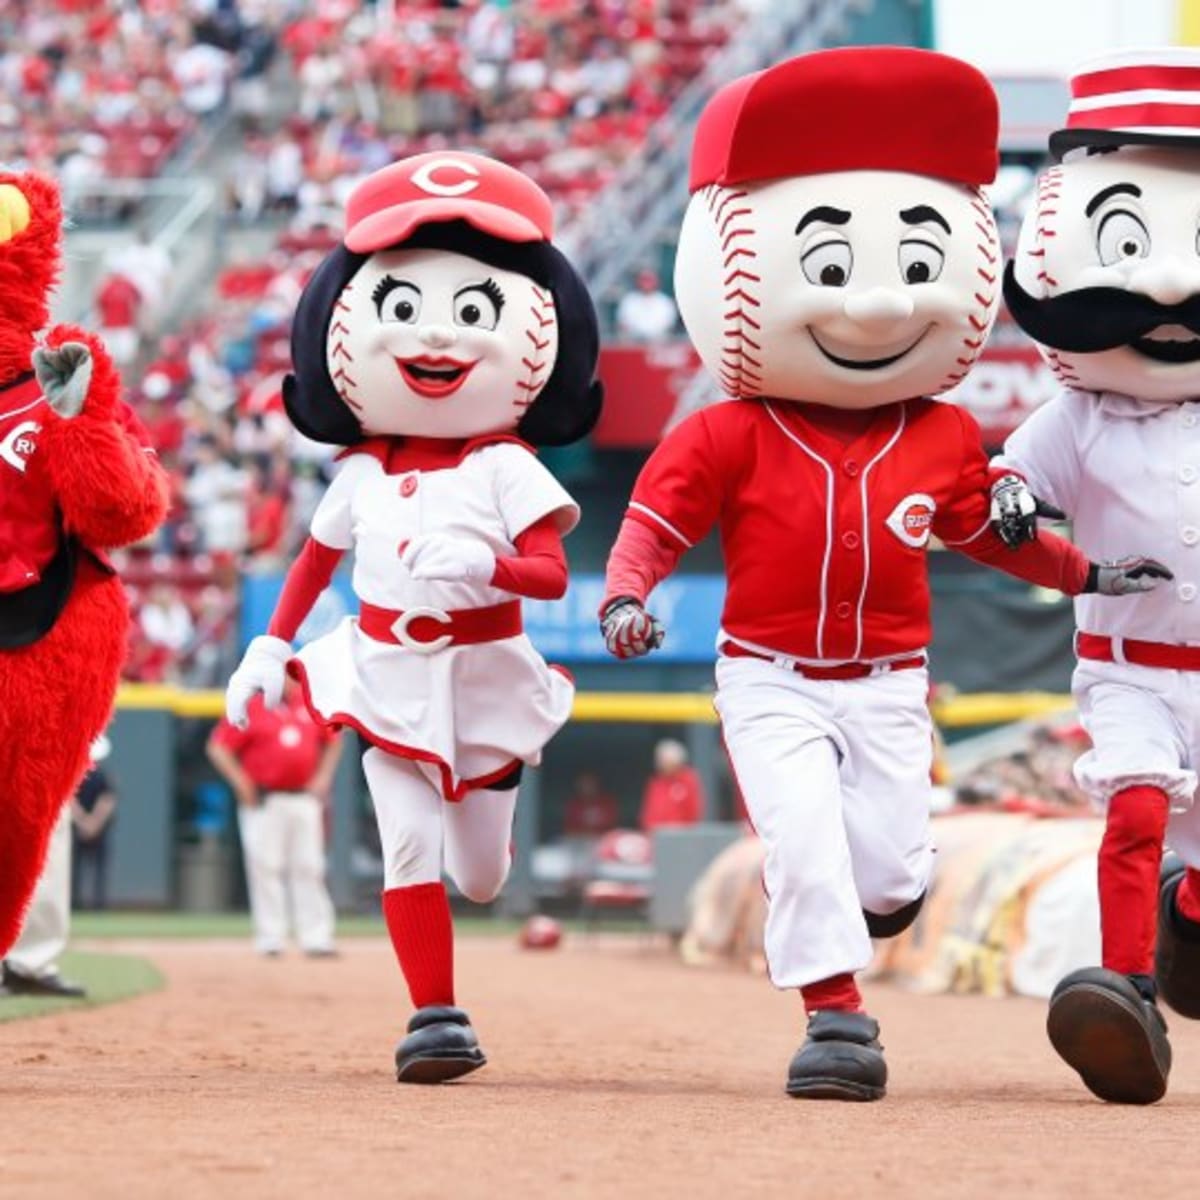 Chicago Cubs almost run over by Reds mascots - Sports Illustrated